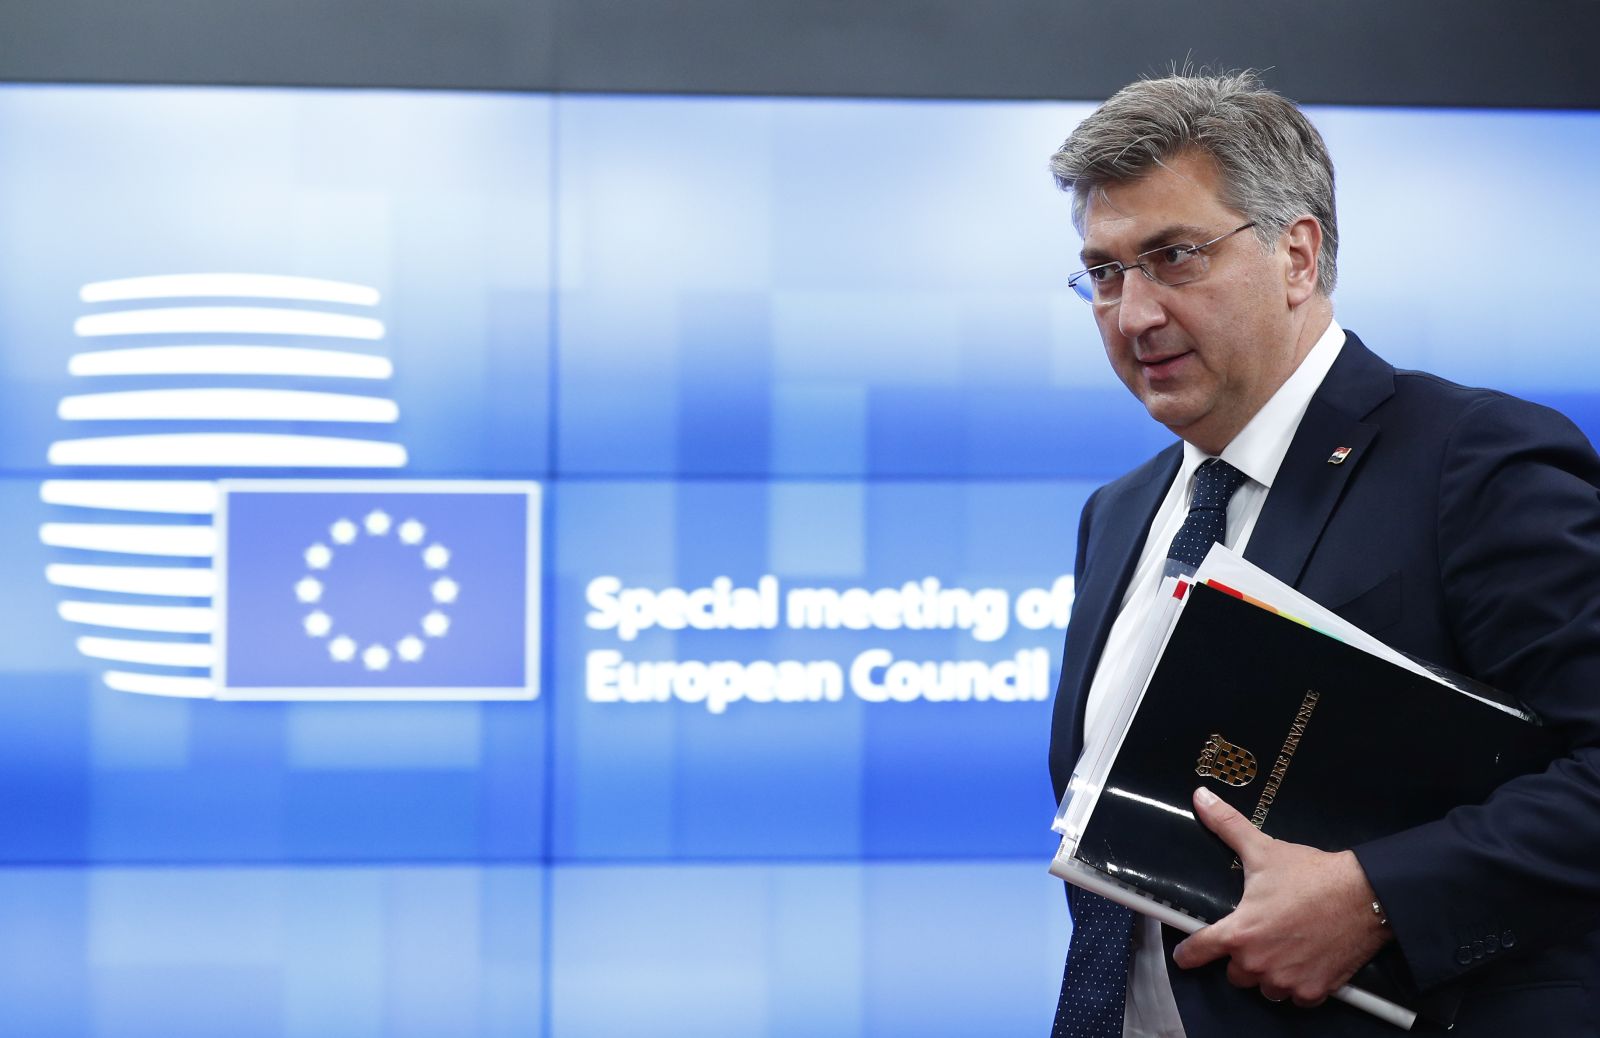 epa09226978 Croatia's Prime Minister Andrej Plenkovic leaves at the end of an EU summit in Brussels, Belgium, 25 May 2021. European Union leaders gathered for a second day of meetings to discuss the coronavirus pandemic and to assess new measures on how to meet targets to become climate-neutral by mid-century.  EPA/JOHANNA GERON / POOL